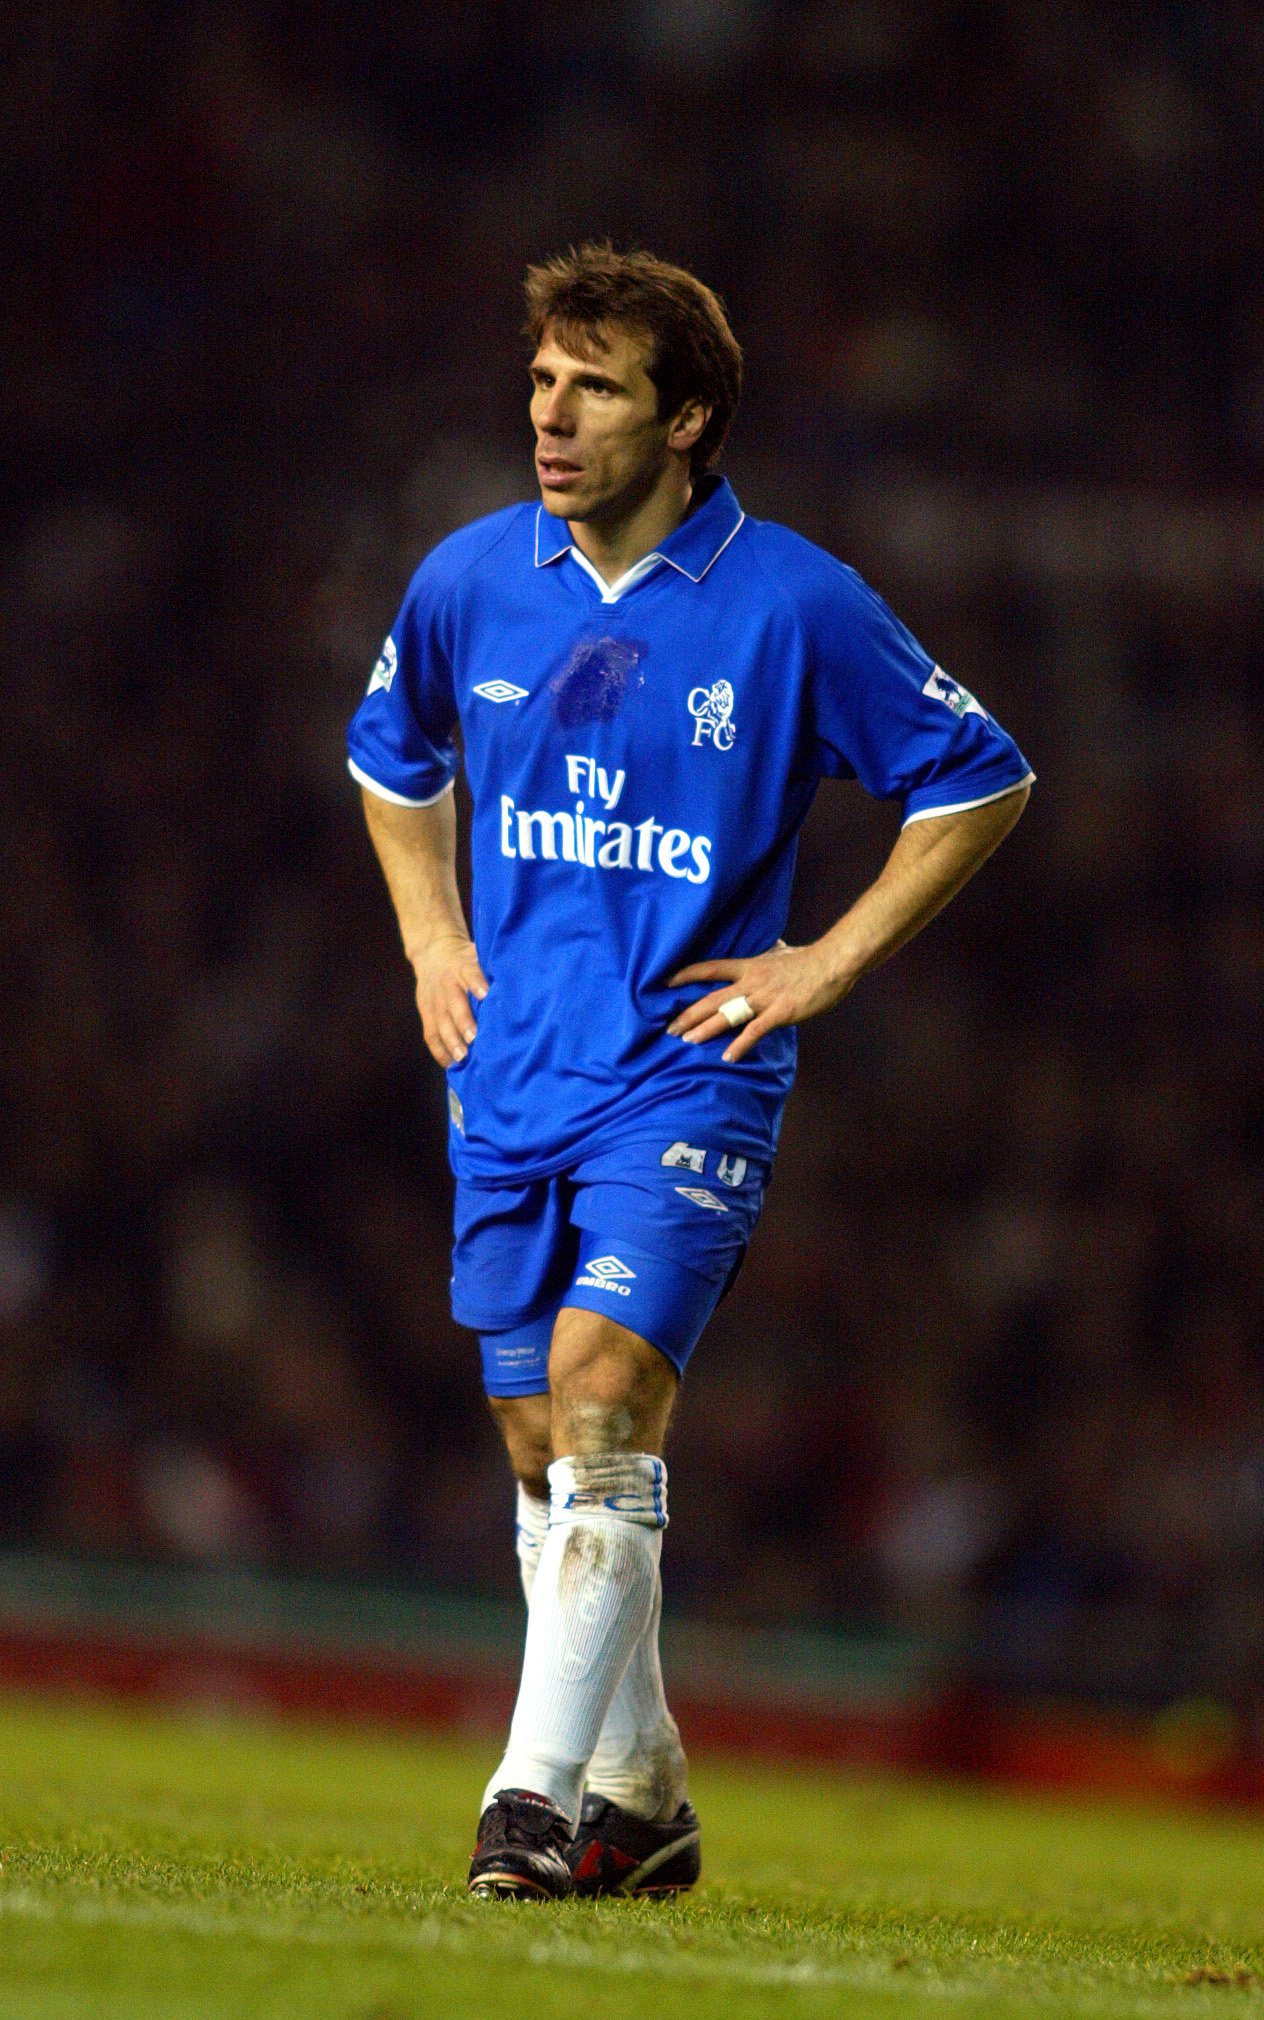 Happy Birthday Gianfranco Zola!

229 Premier League apps
59 Goals 
42 Assists 

What a player 